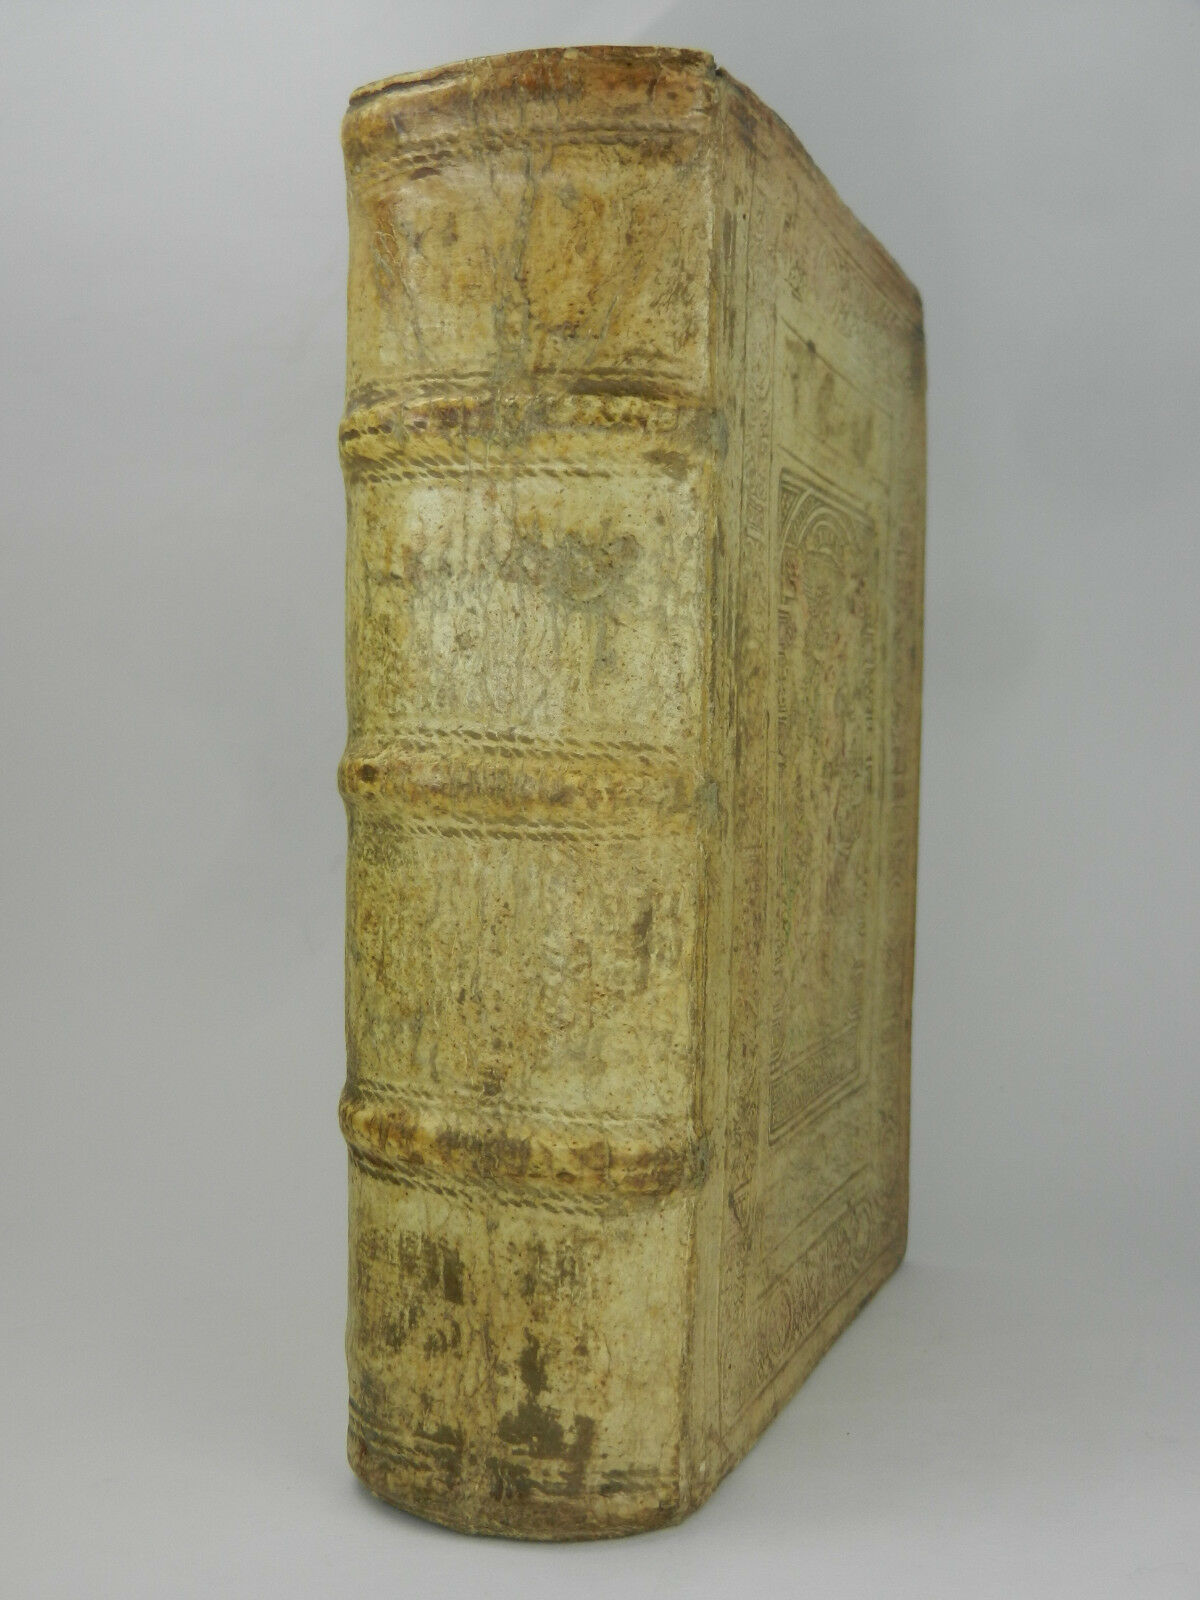 THE COMEDIES OF ARISTOPHANES 1586 Blind Stamped Pigskin, Renaissance Binding